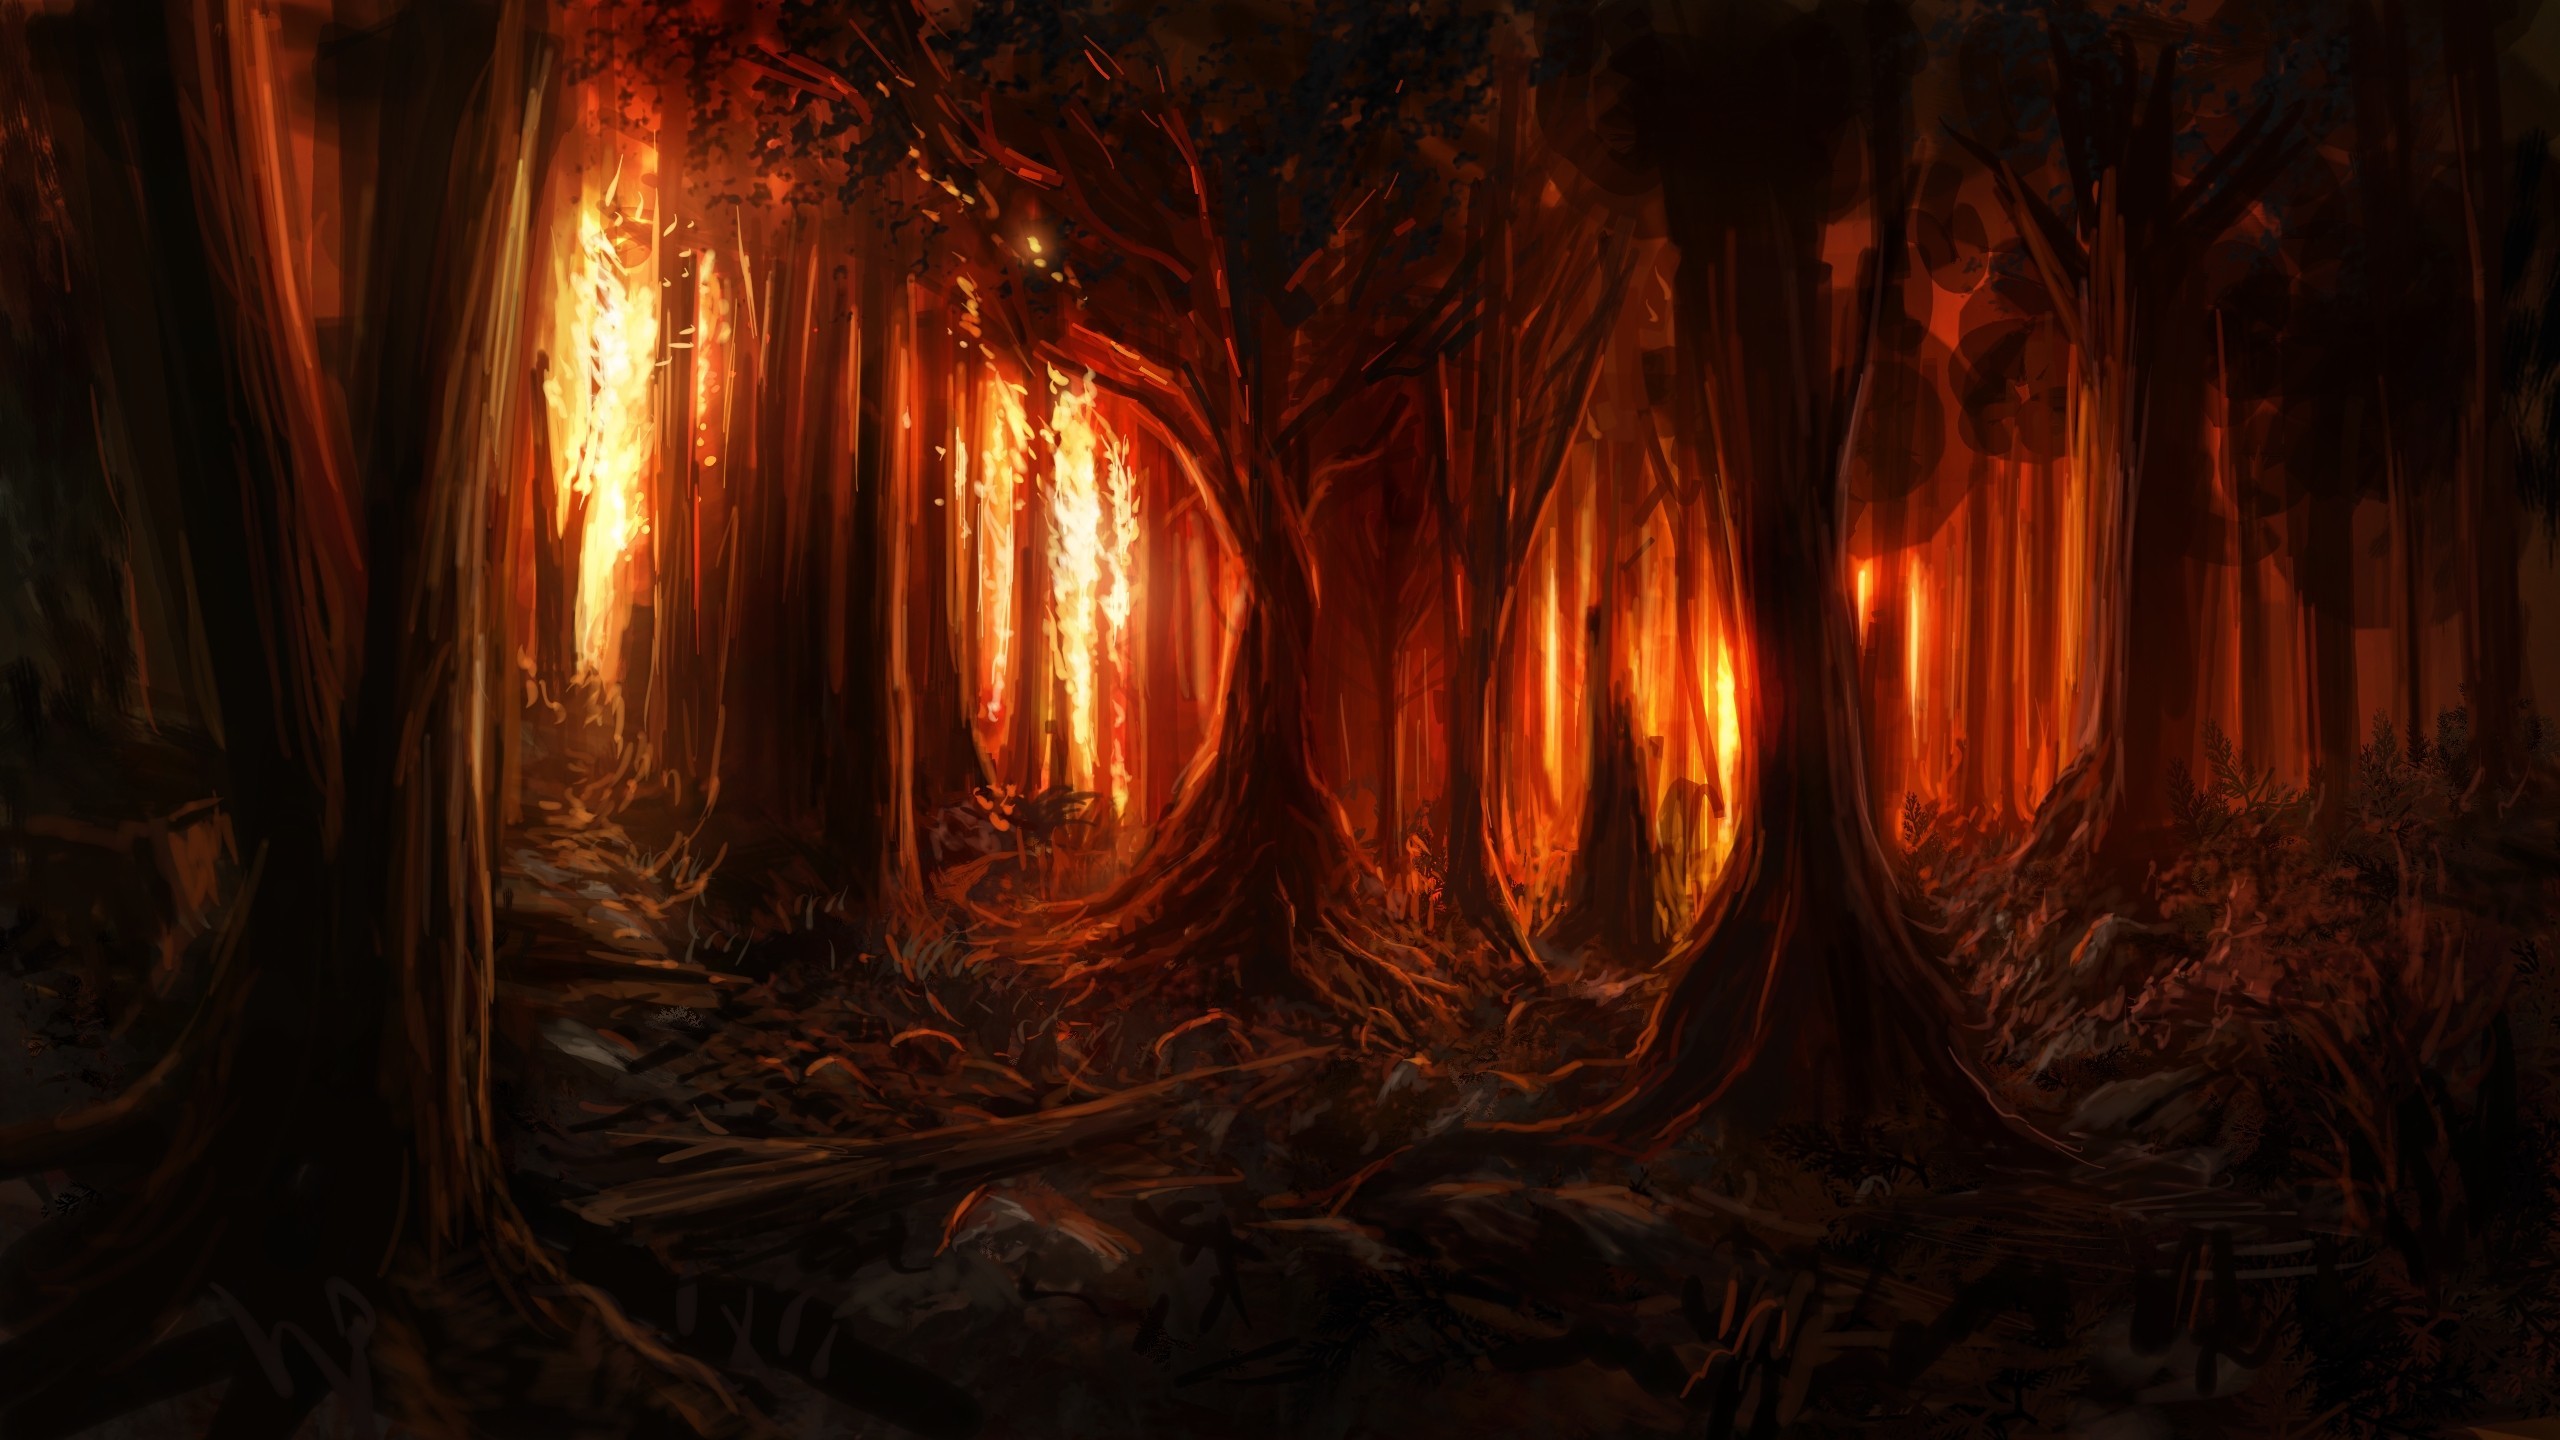 2560x1440 General  digital art nature trees forest painting burning fire  wood artwork branch